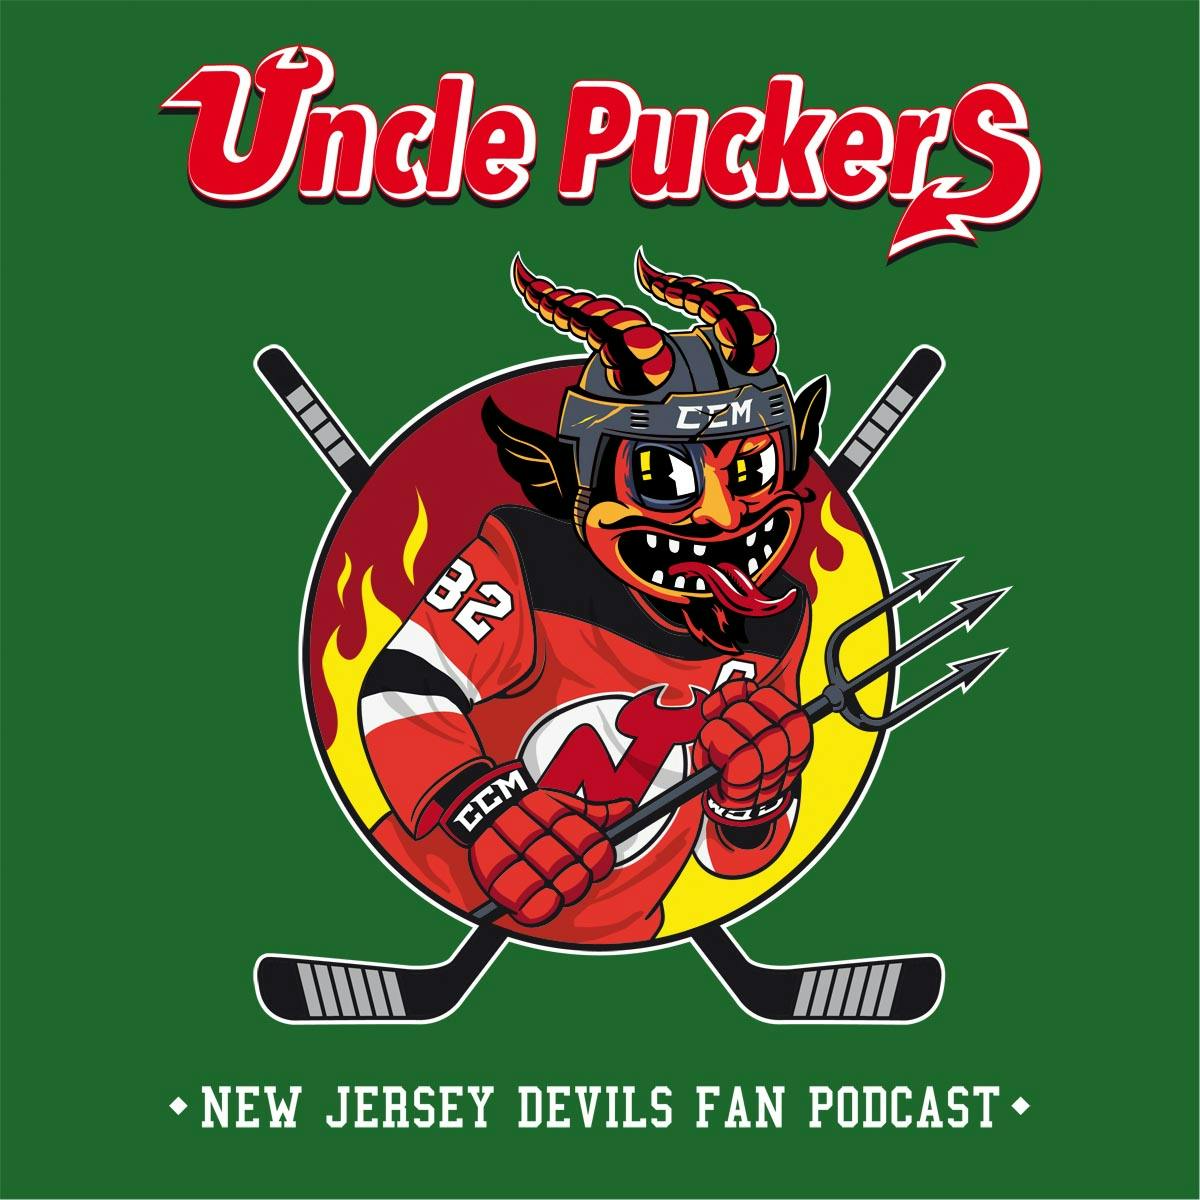 The Best Devils Team Ever?